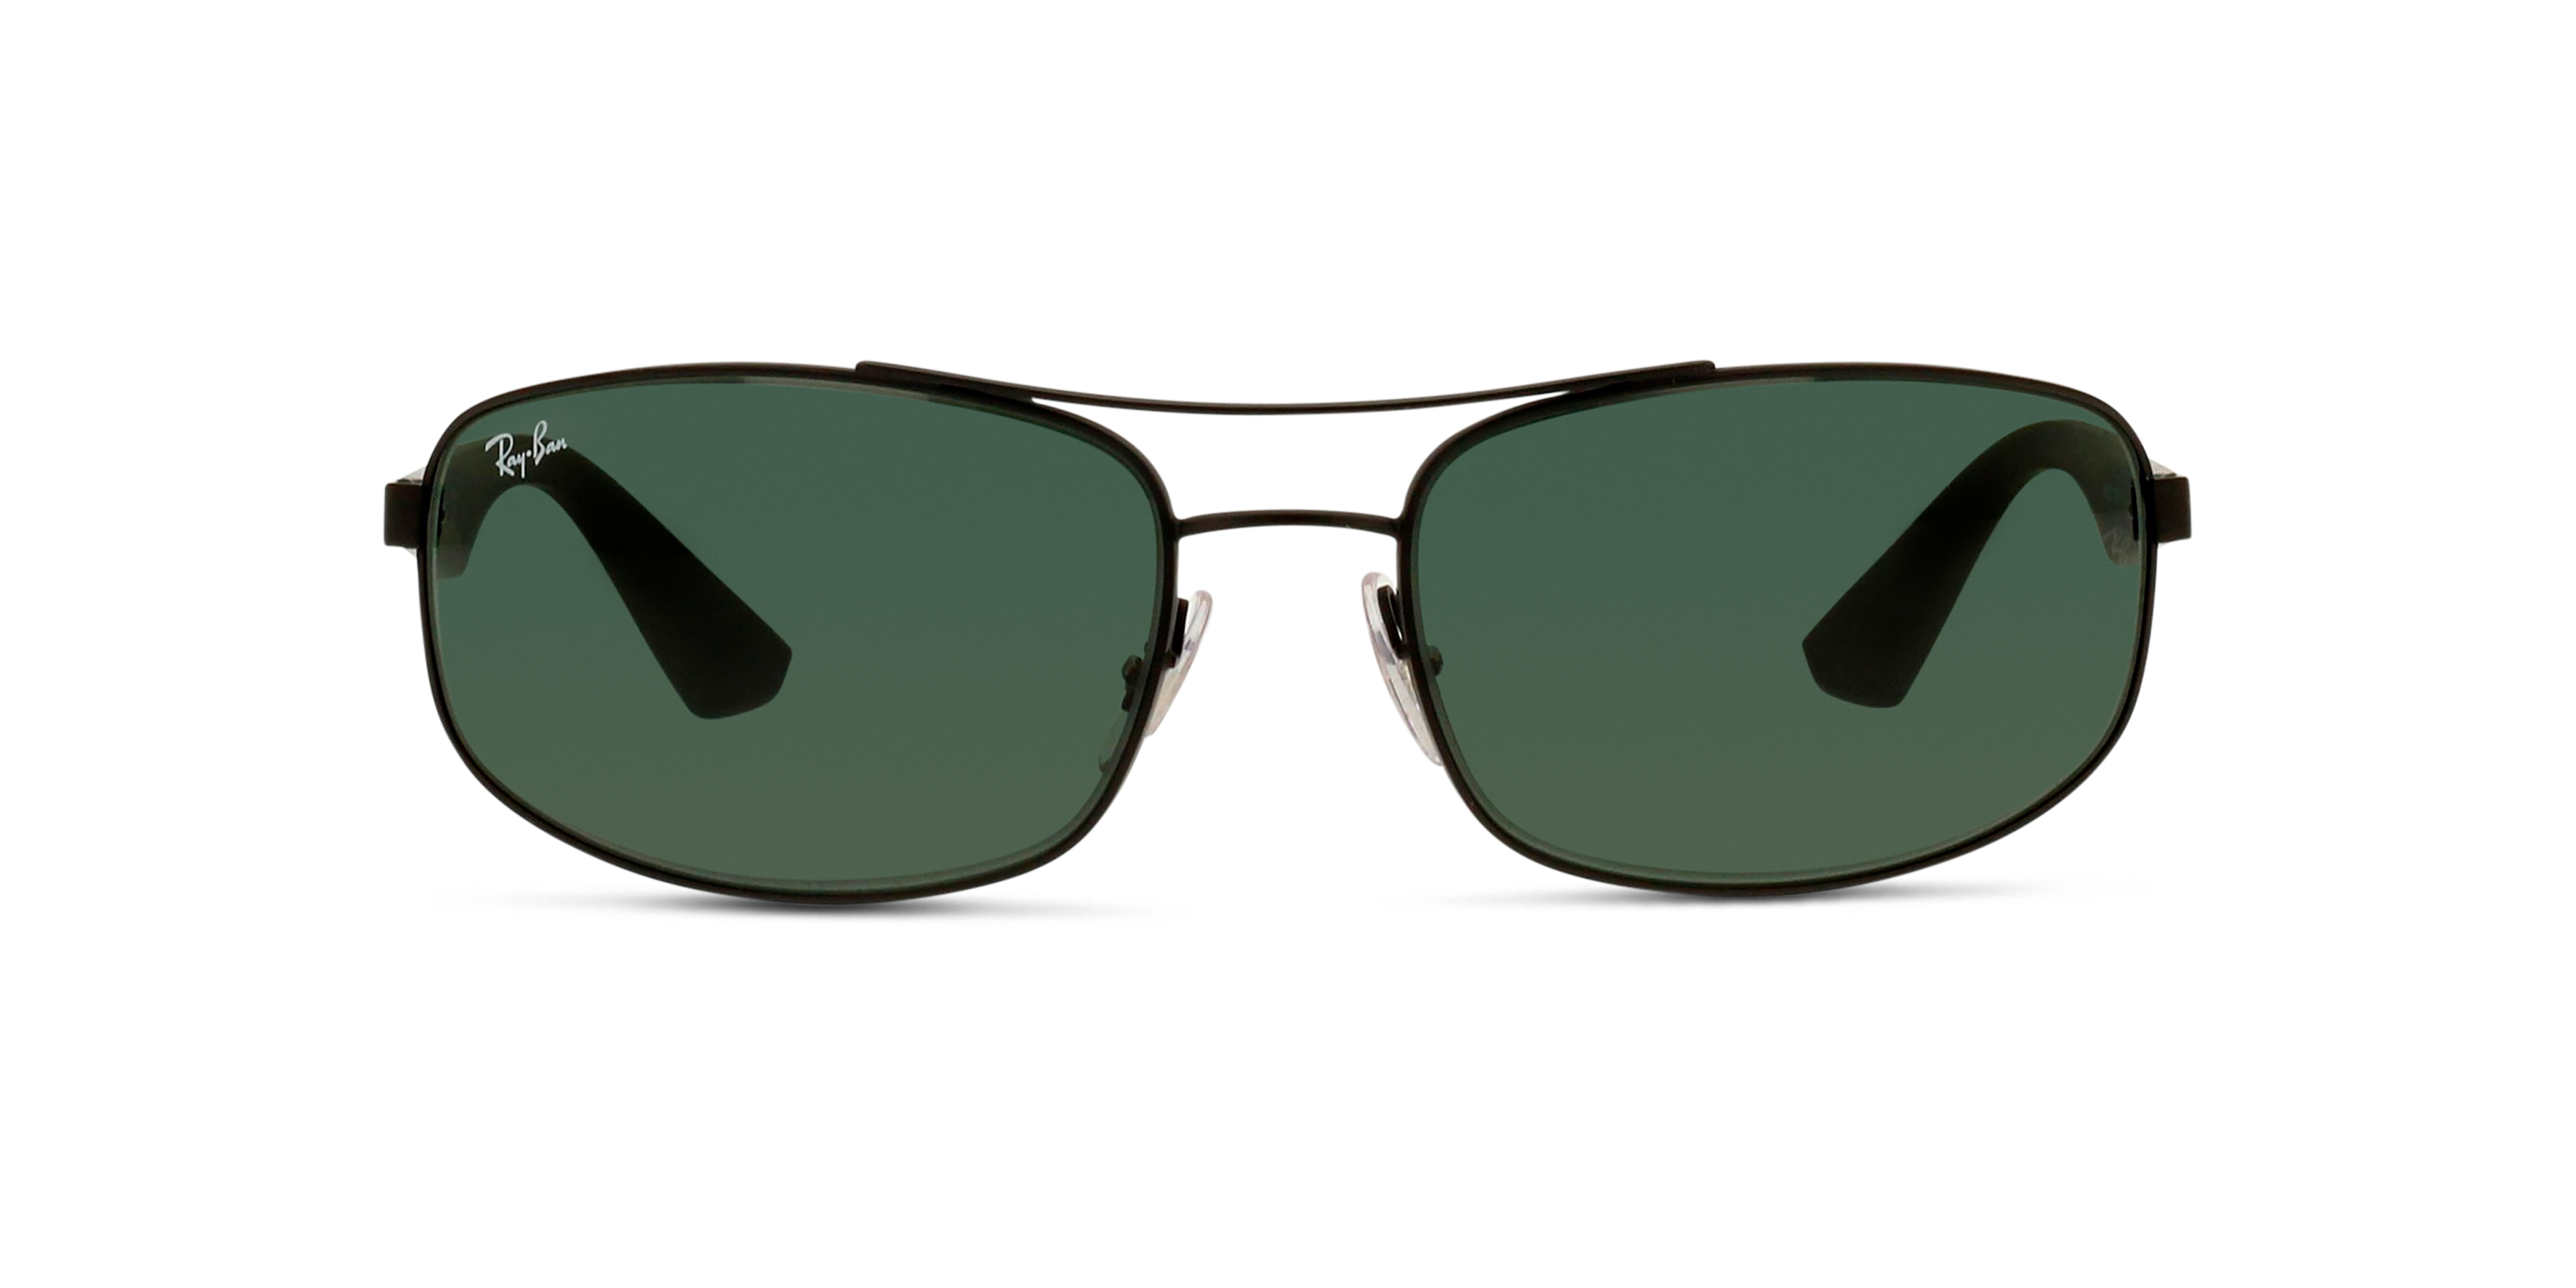 [products.image.front] Ray-Ban RB3527 006/71